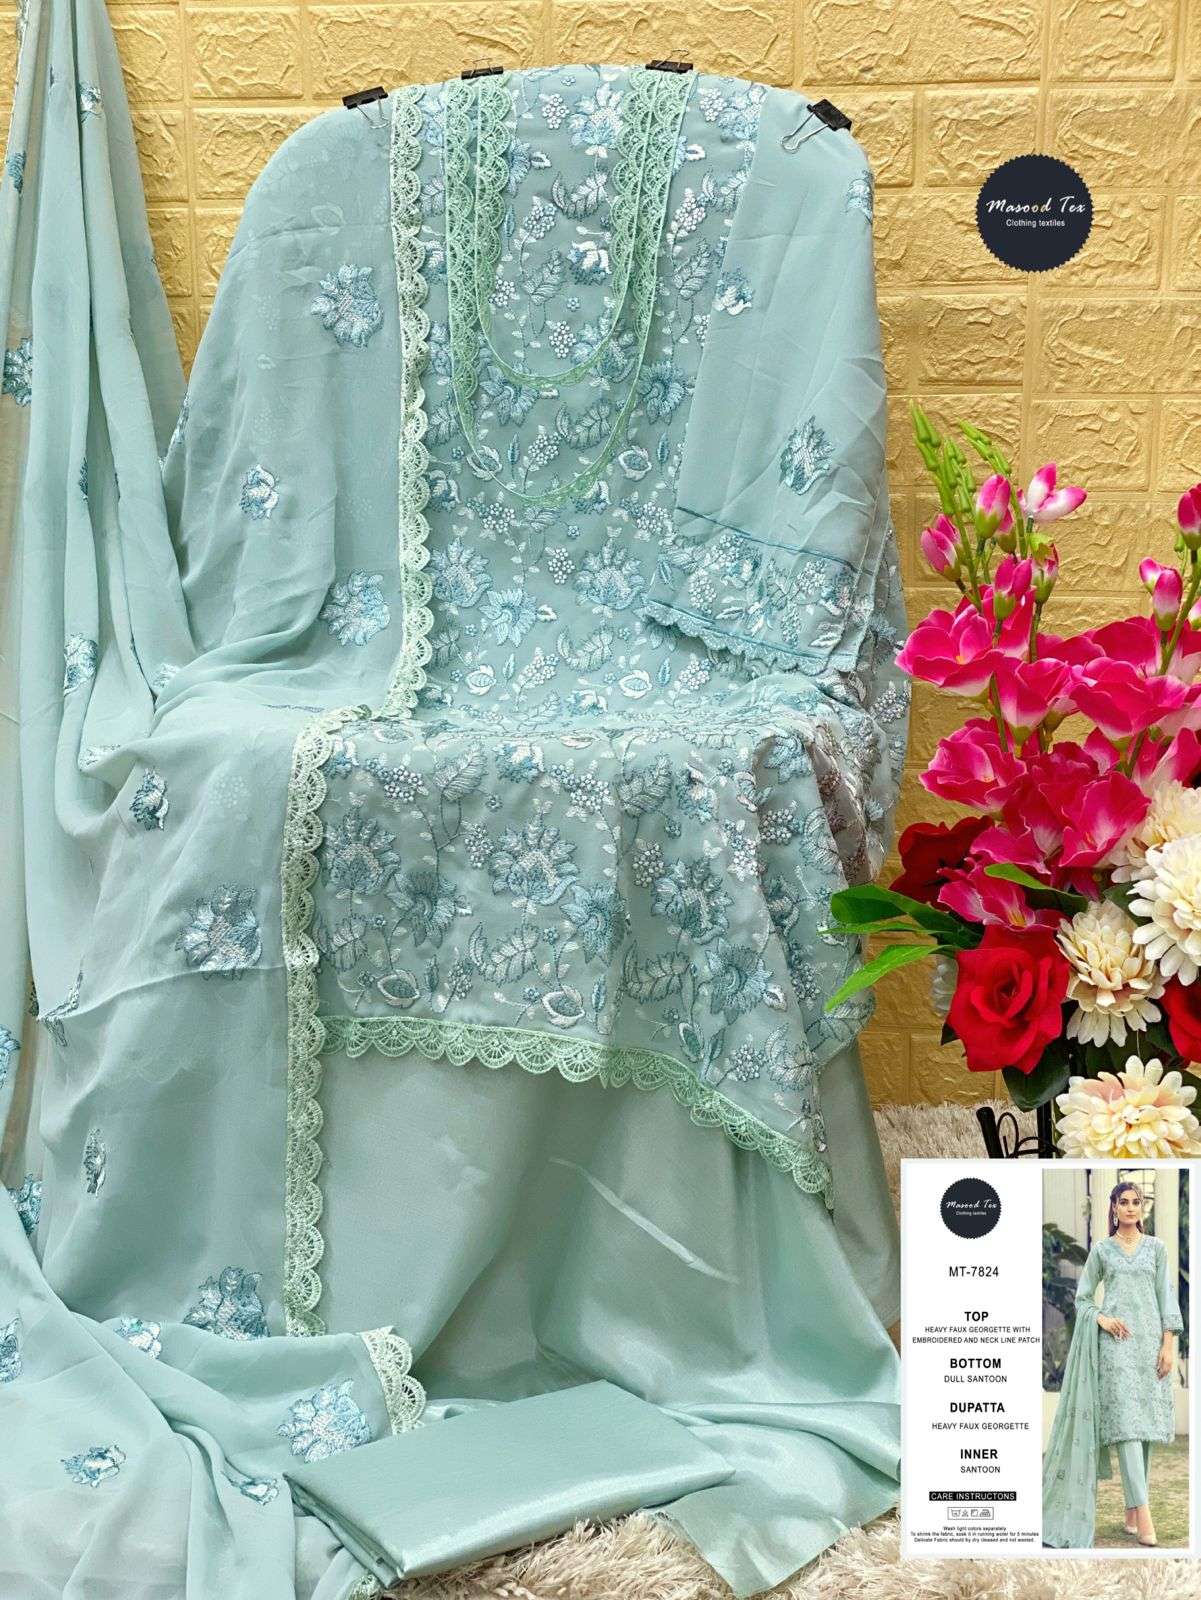 MASOOD HIT DESIGN 7824 BY MASOOD TEX BEAUTIFUL PAKISTANI SUITS COLORFUL STYLISH FANCY CASUAL WEAR & ETHNIC WEAR FAUX GEORGETTE EMBROIDERED DRESSES AT WHOLESALE PRICE